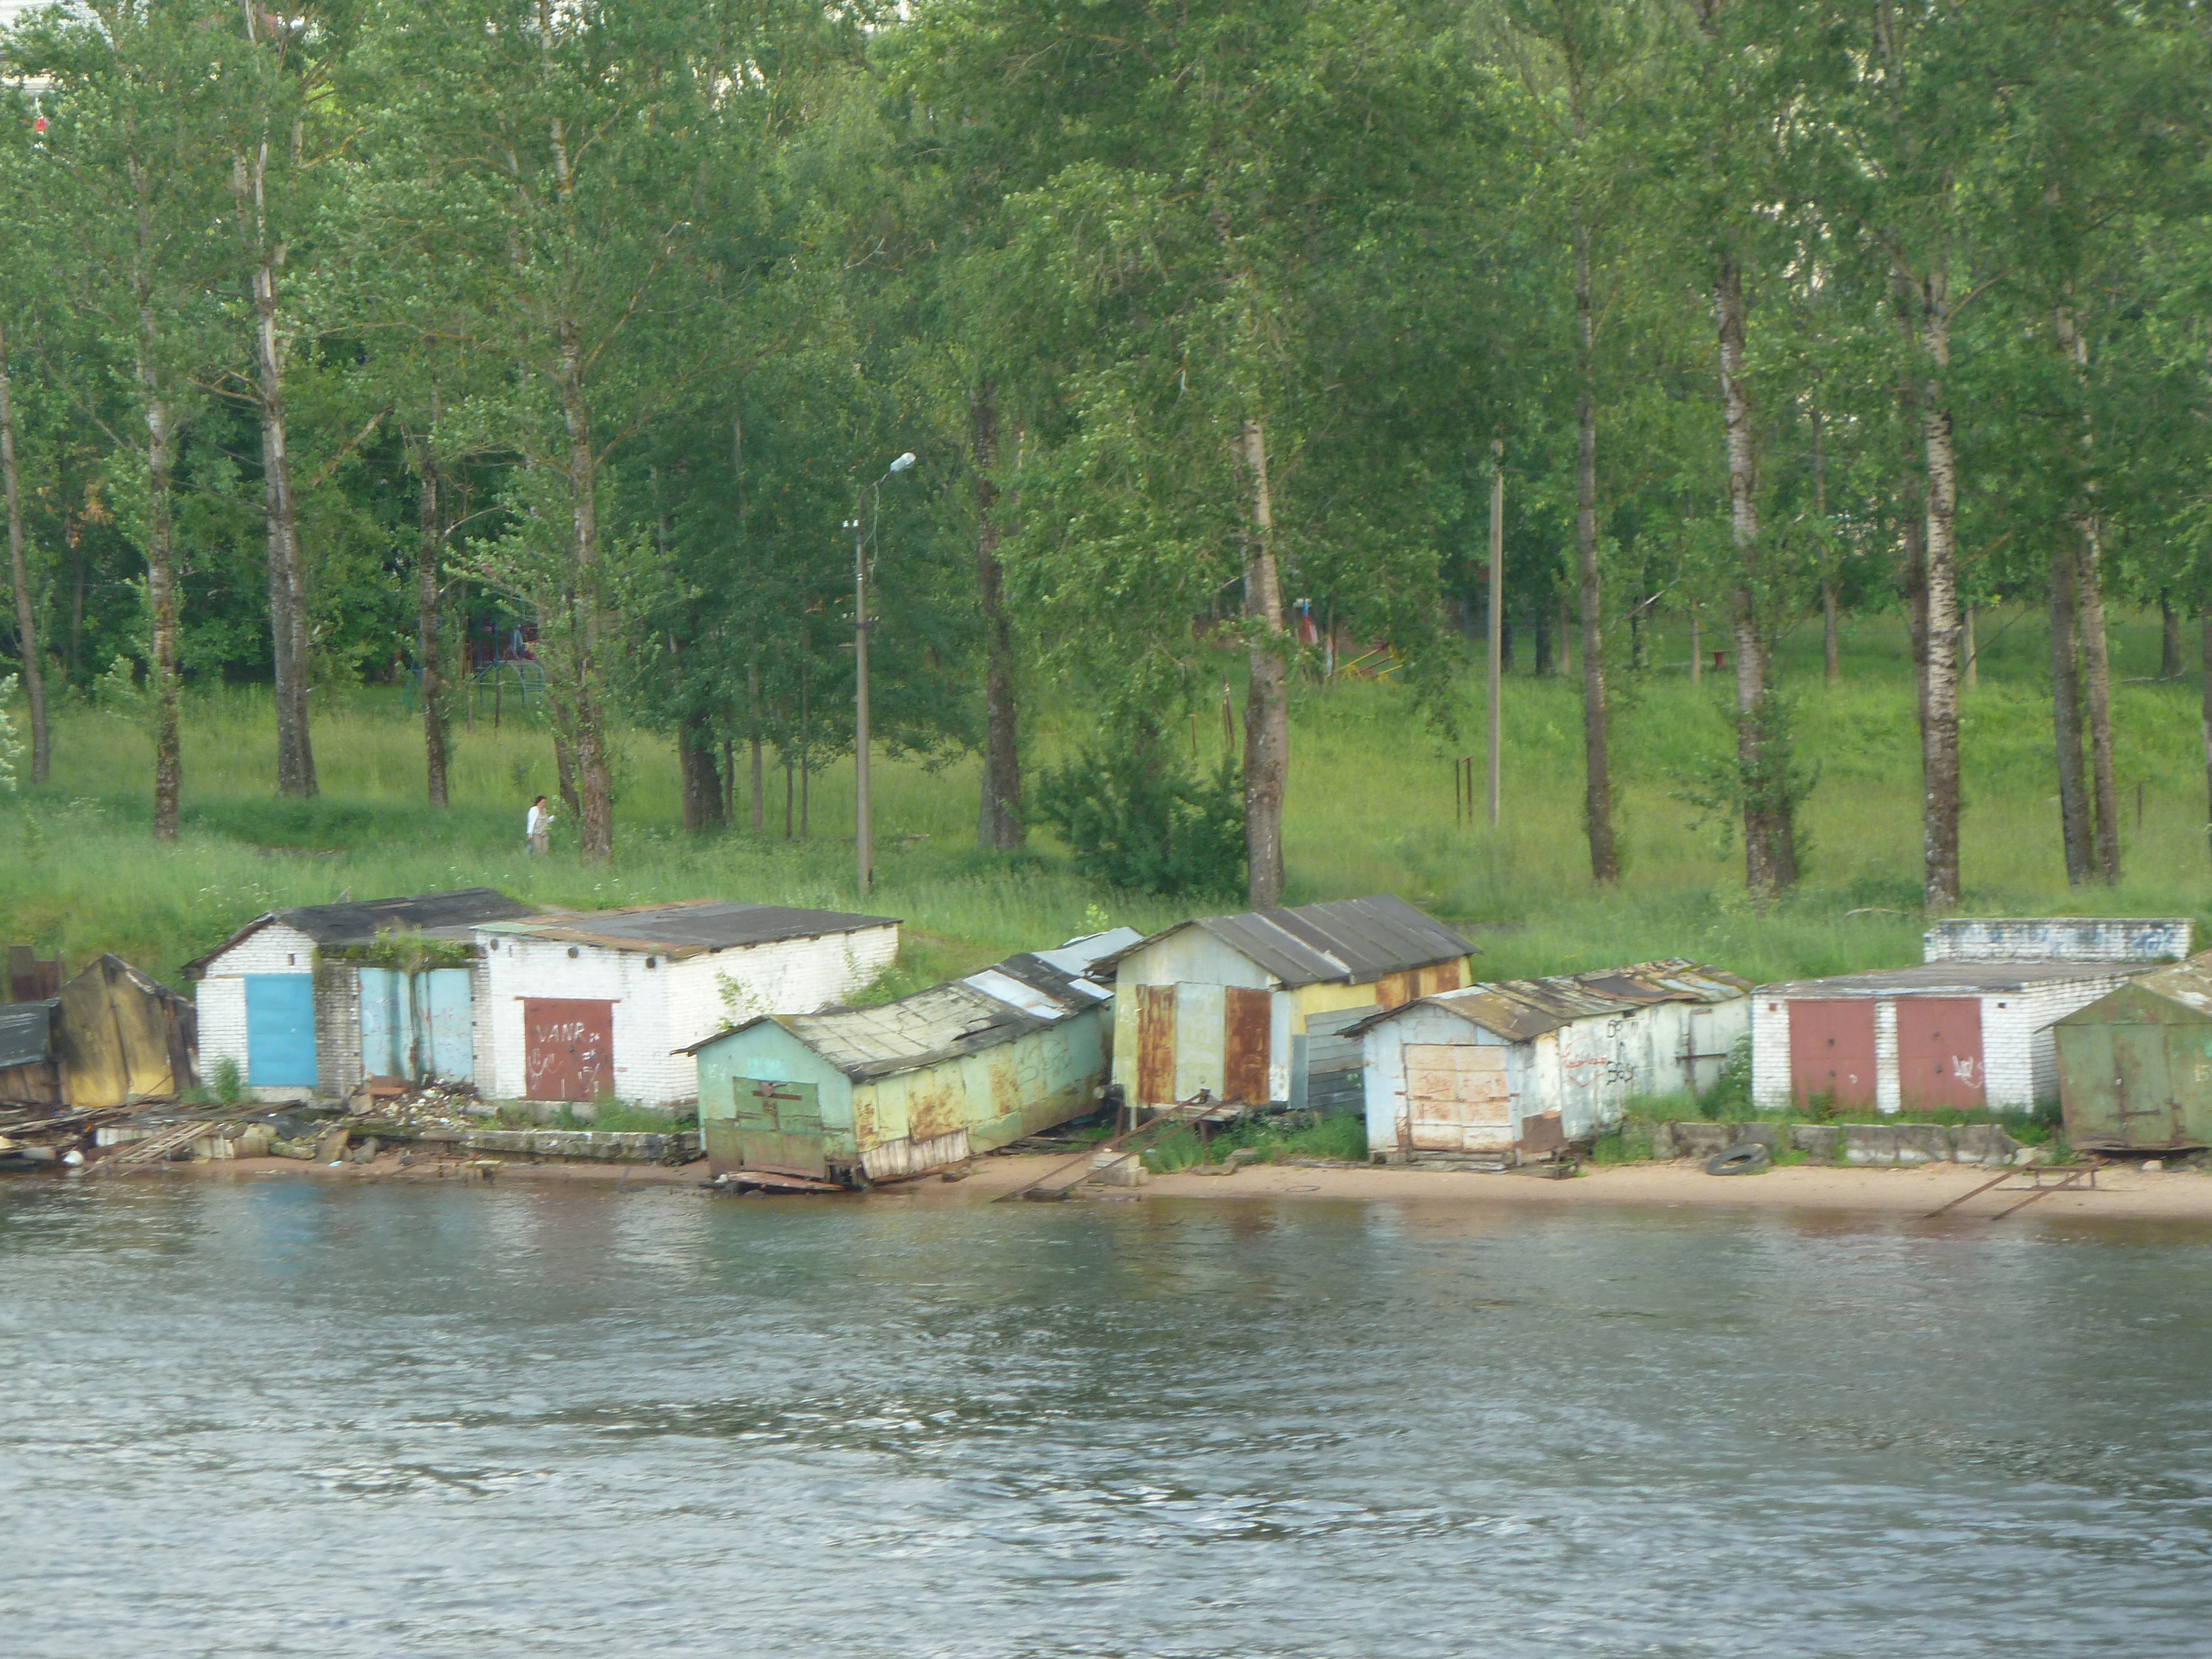 shacks on the journey from St Petersburg to Moscow.jpg